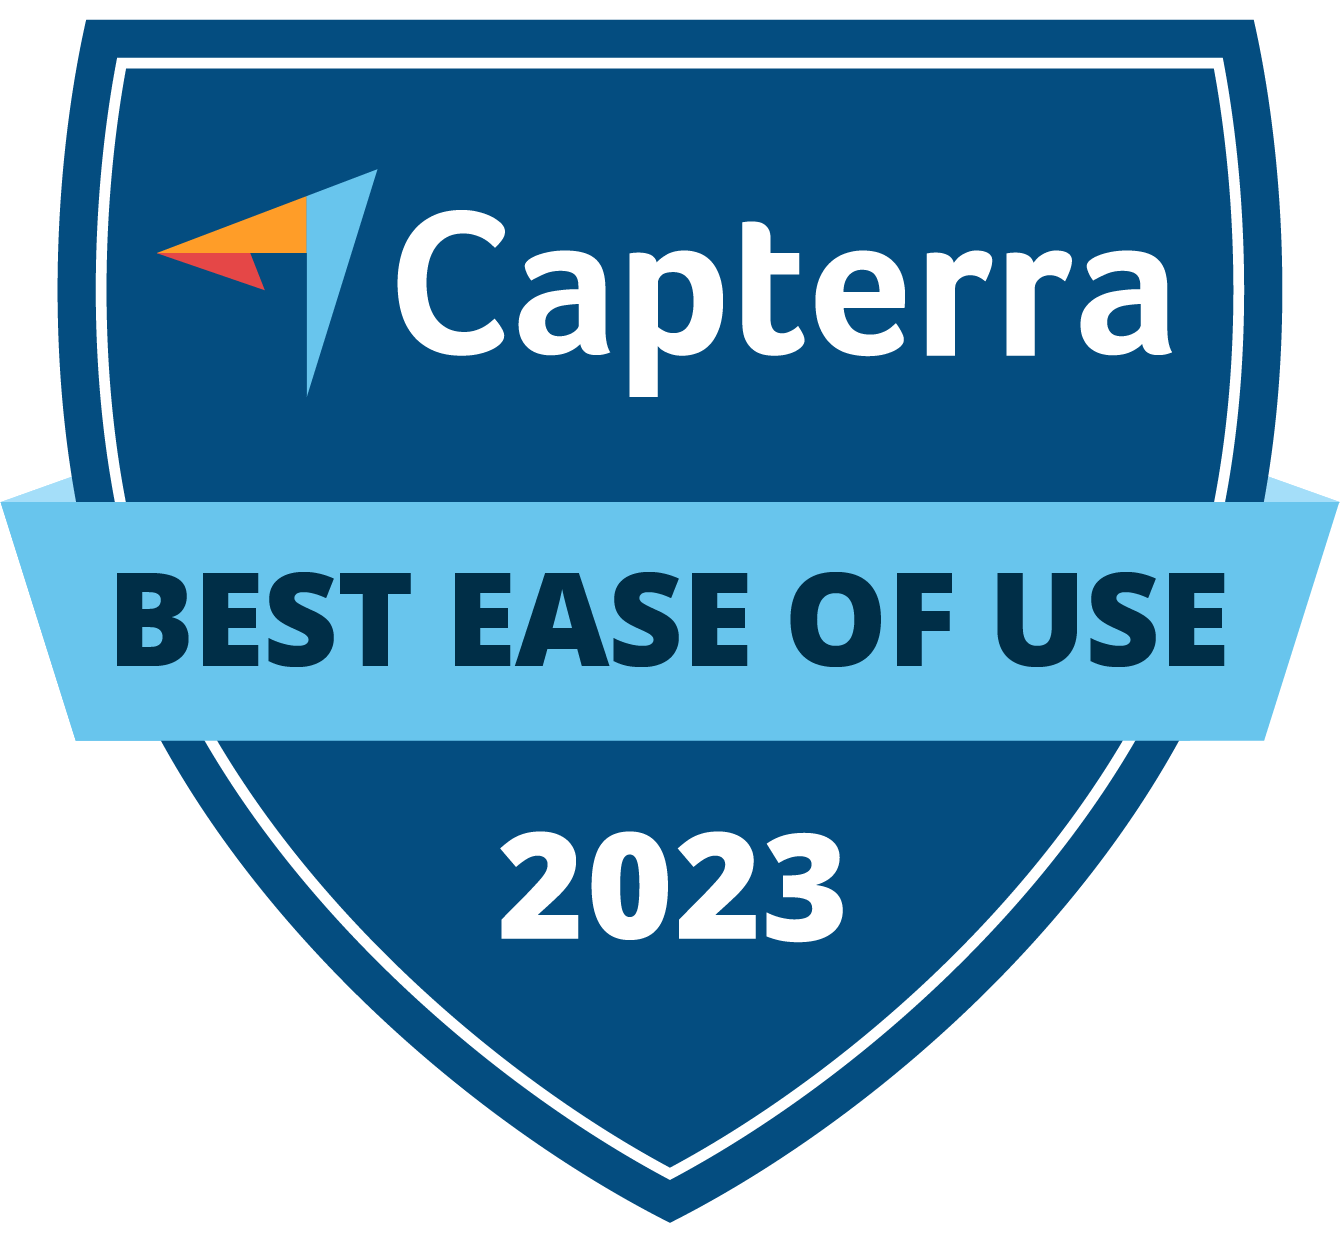 Capterra - Best ease of use 2023